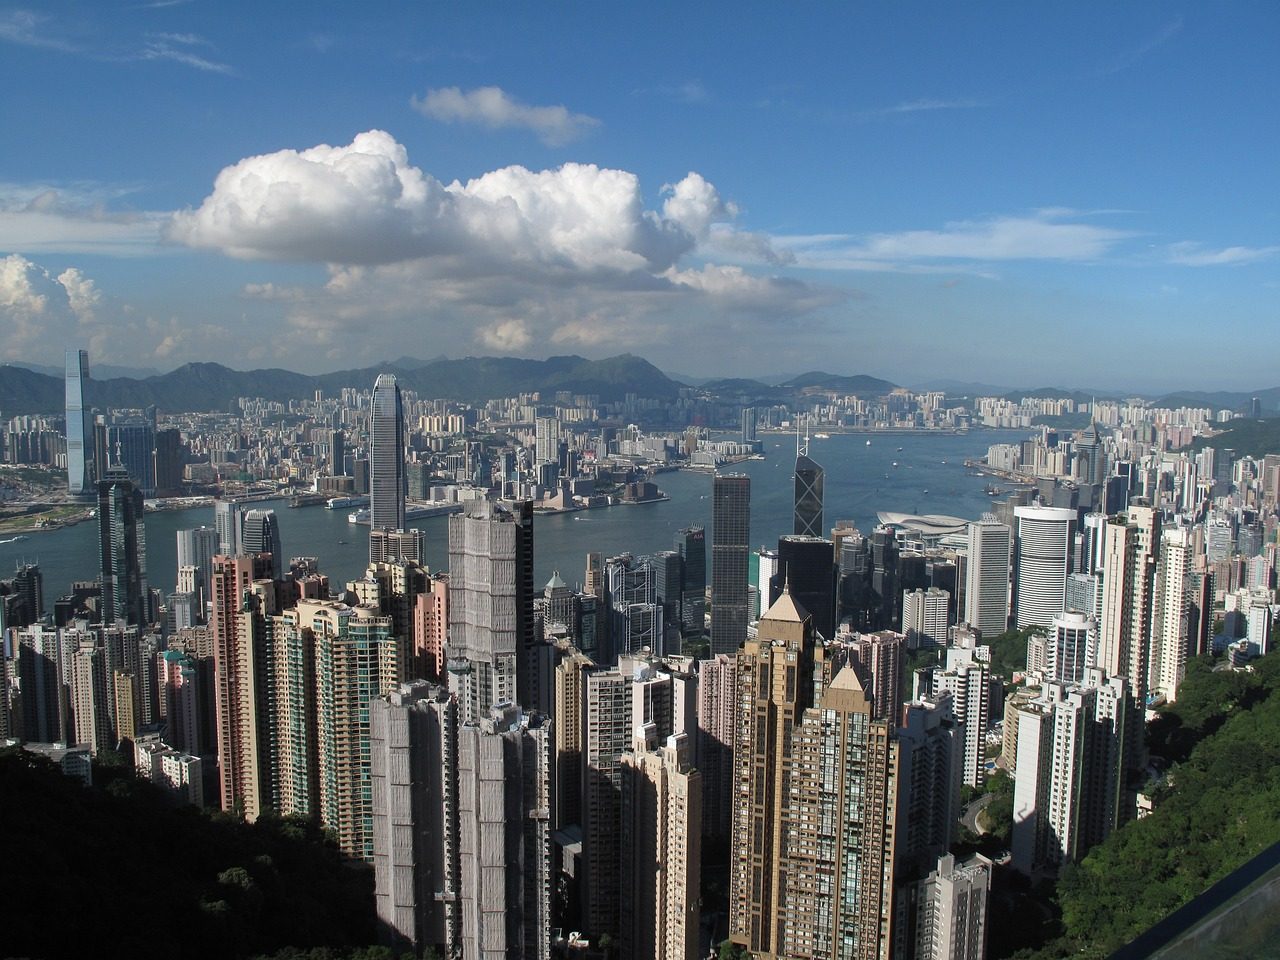 Take-private deals pick up in Hong Kong as public listings lose sheen